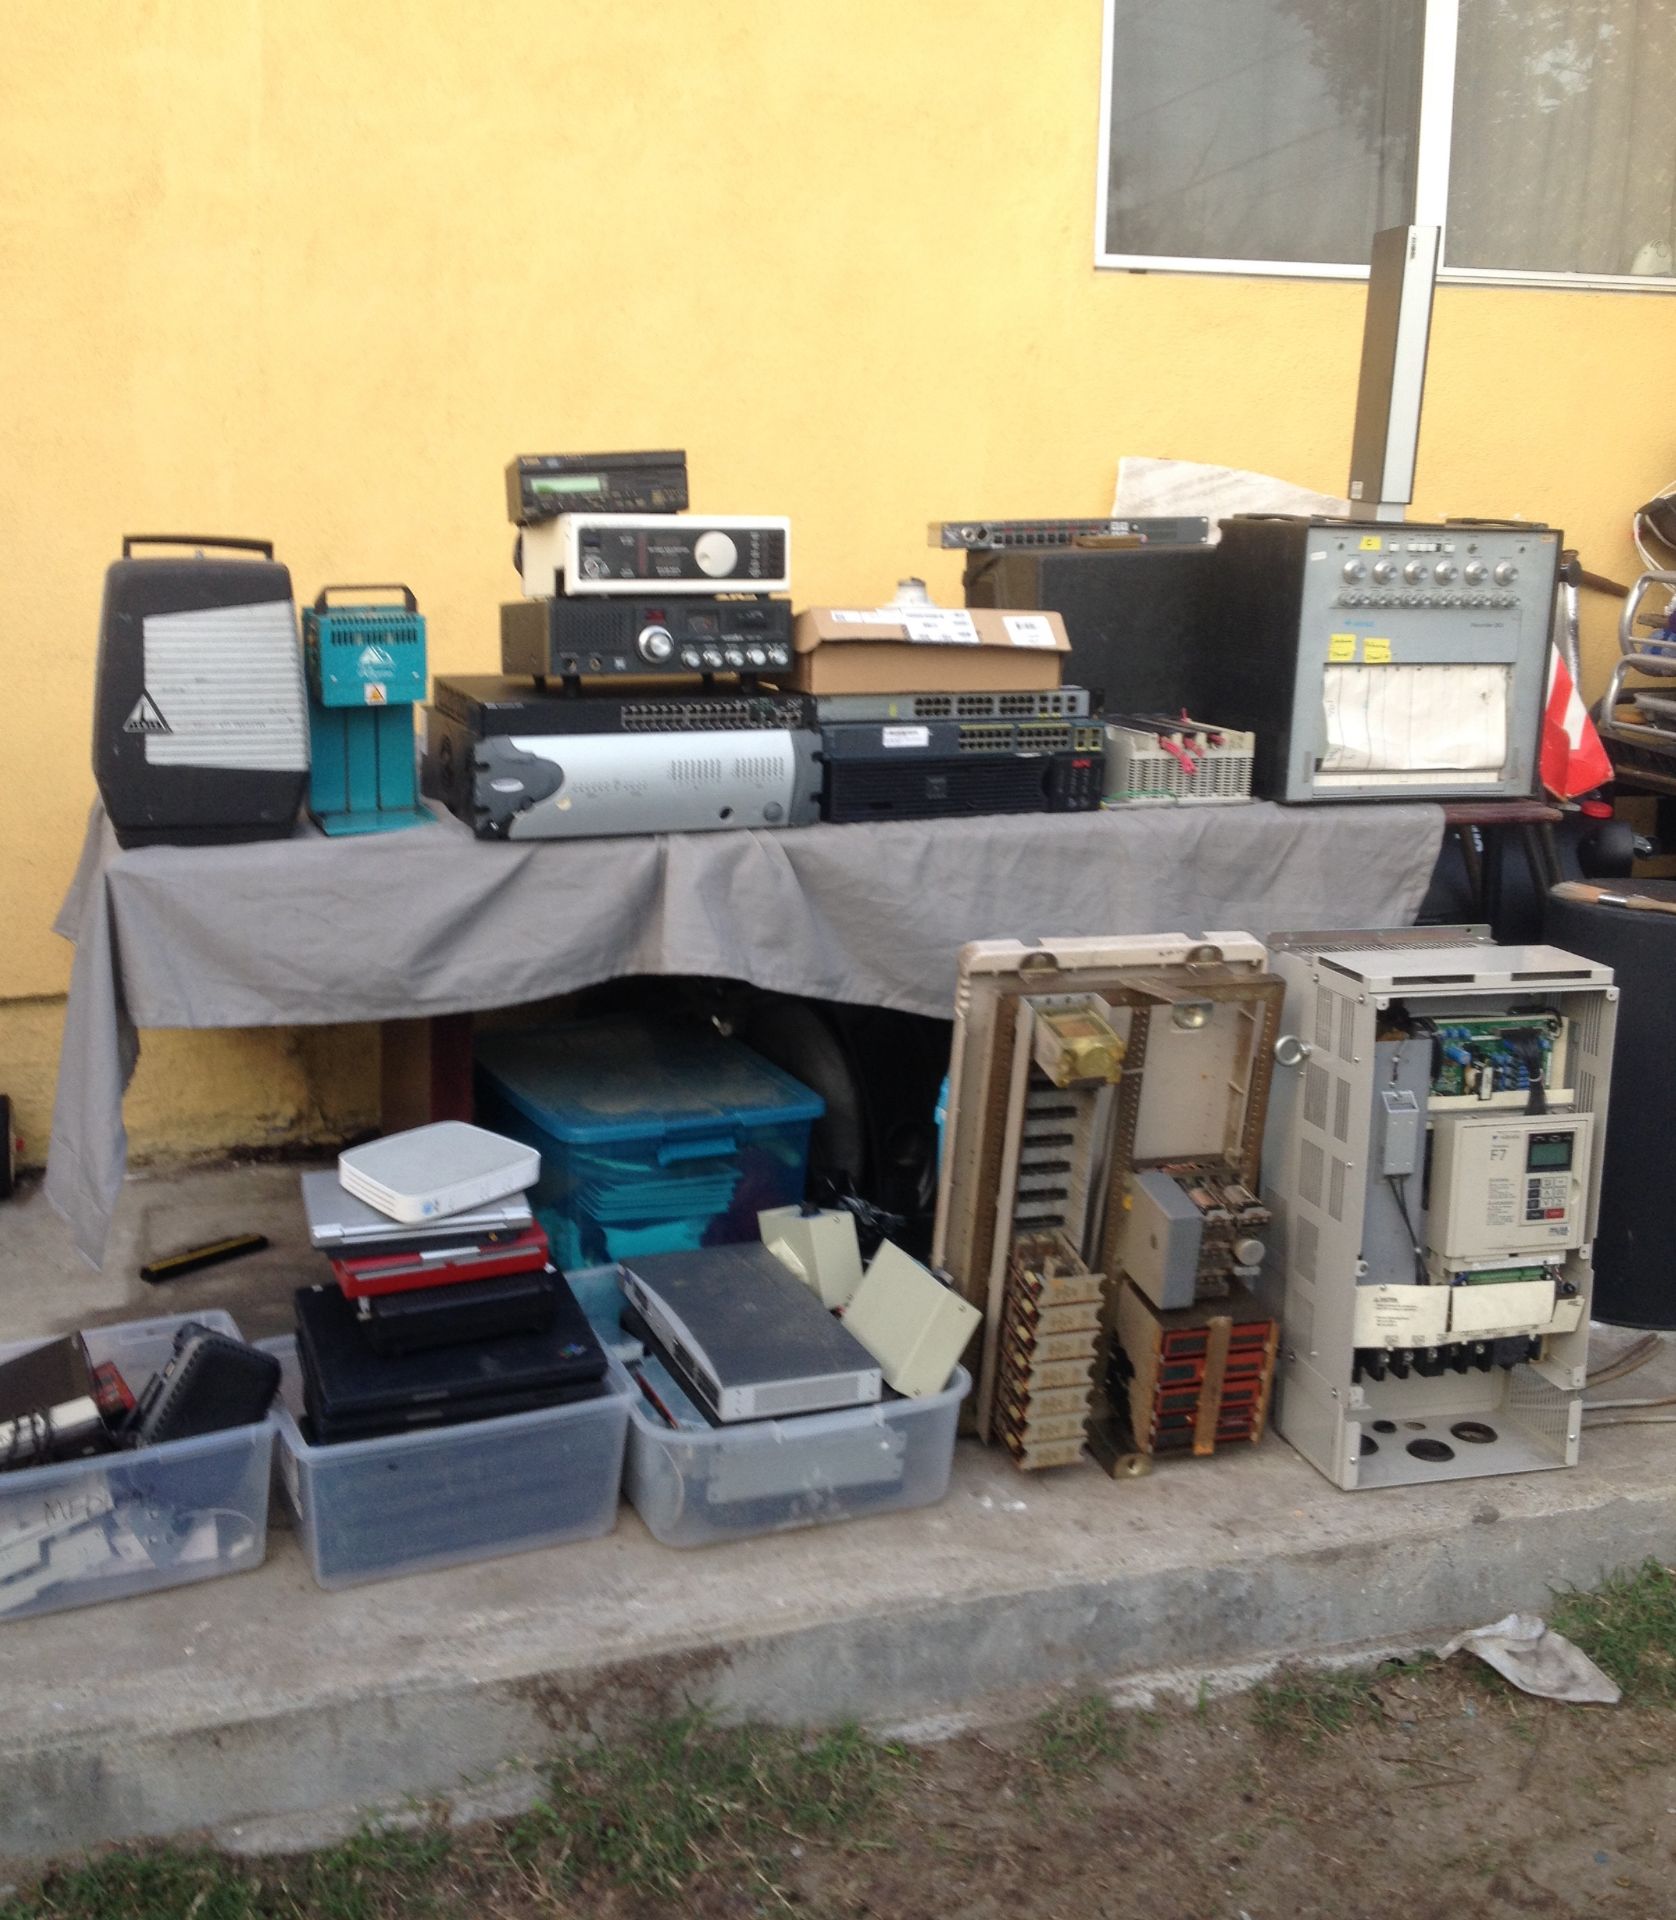 RANDOM HUGE LOT ELECTRONICS & RARE DEVICES, LAPTOPS, SERVERS AND MUCH MORE - Image 2 of 7